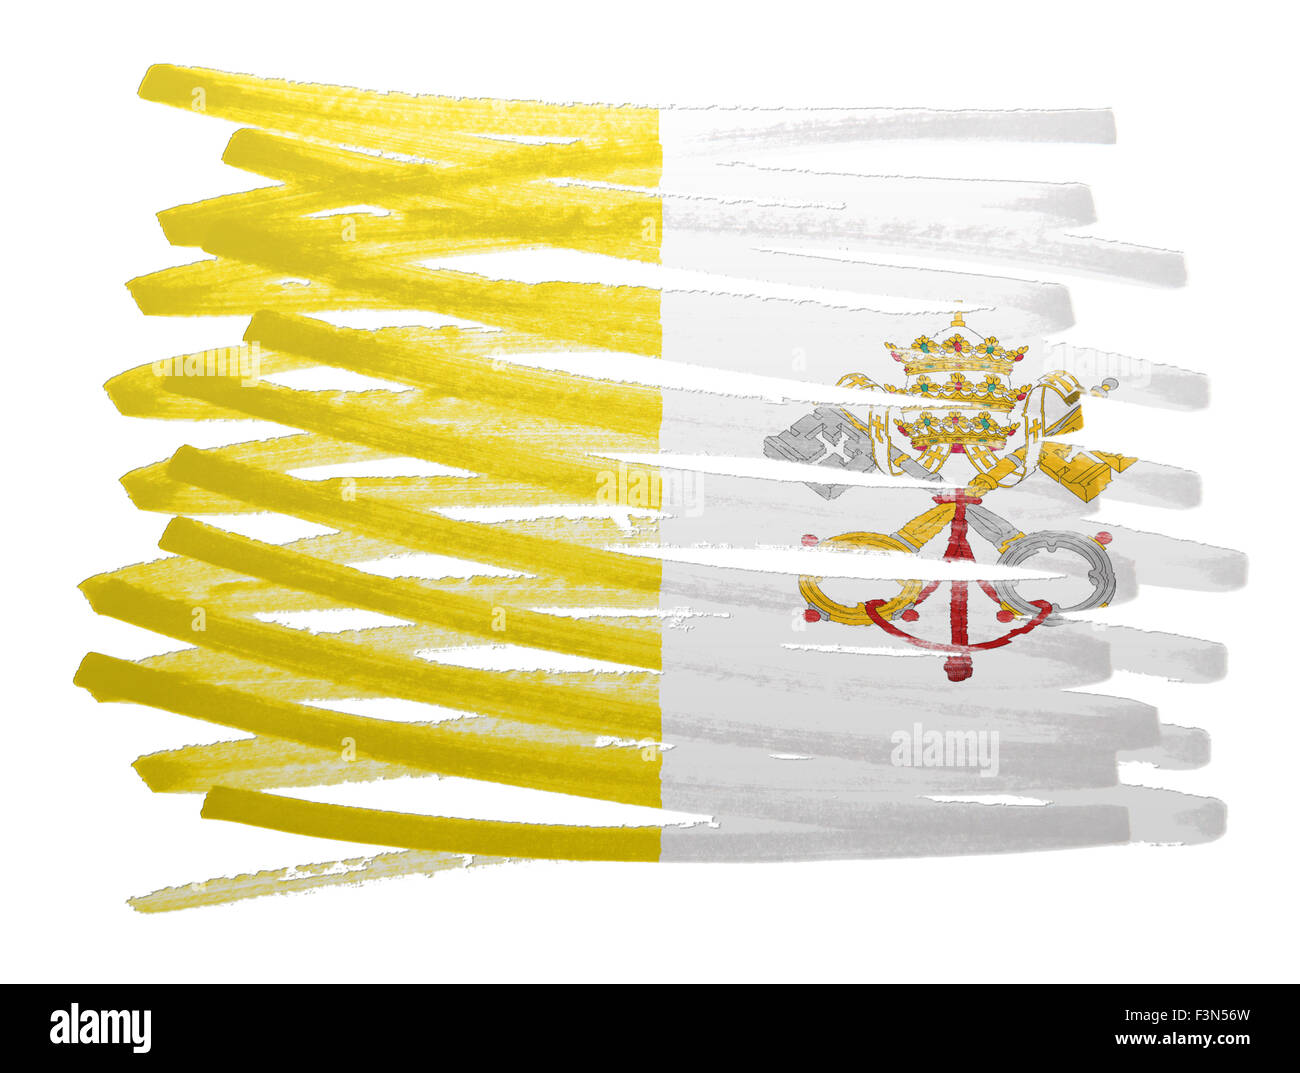 Flag illustration made with pen - Vatican City Stock Photo